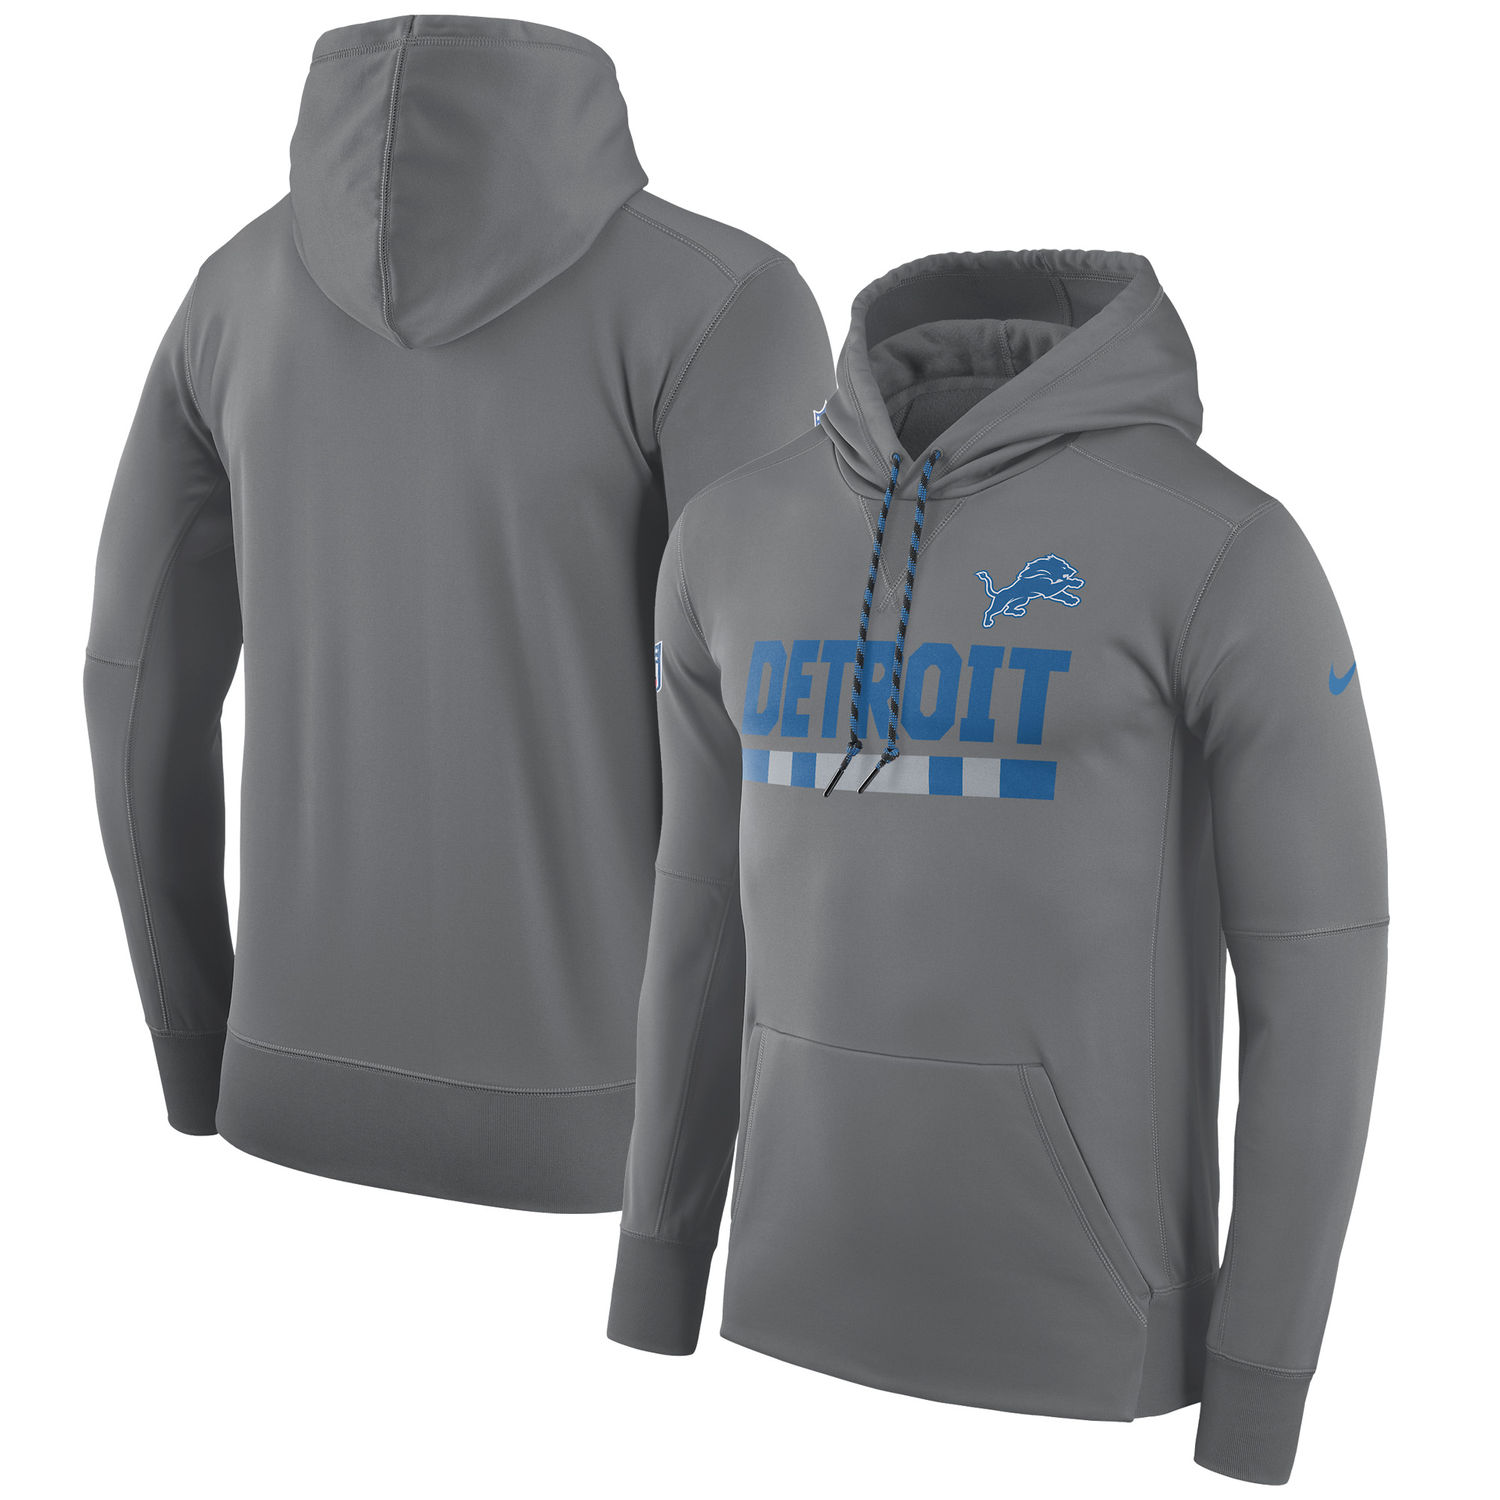 Mens Detroit Lions Nike Heathered Gray Sideline Team Name Performance Pullover Hoodie